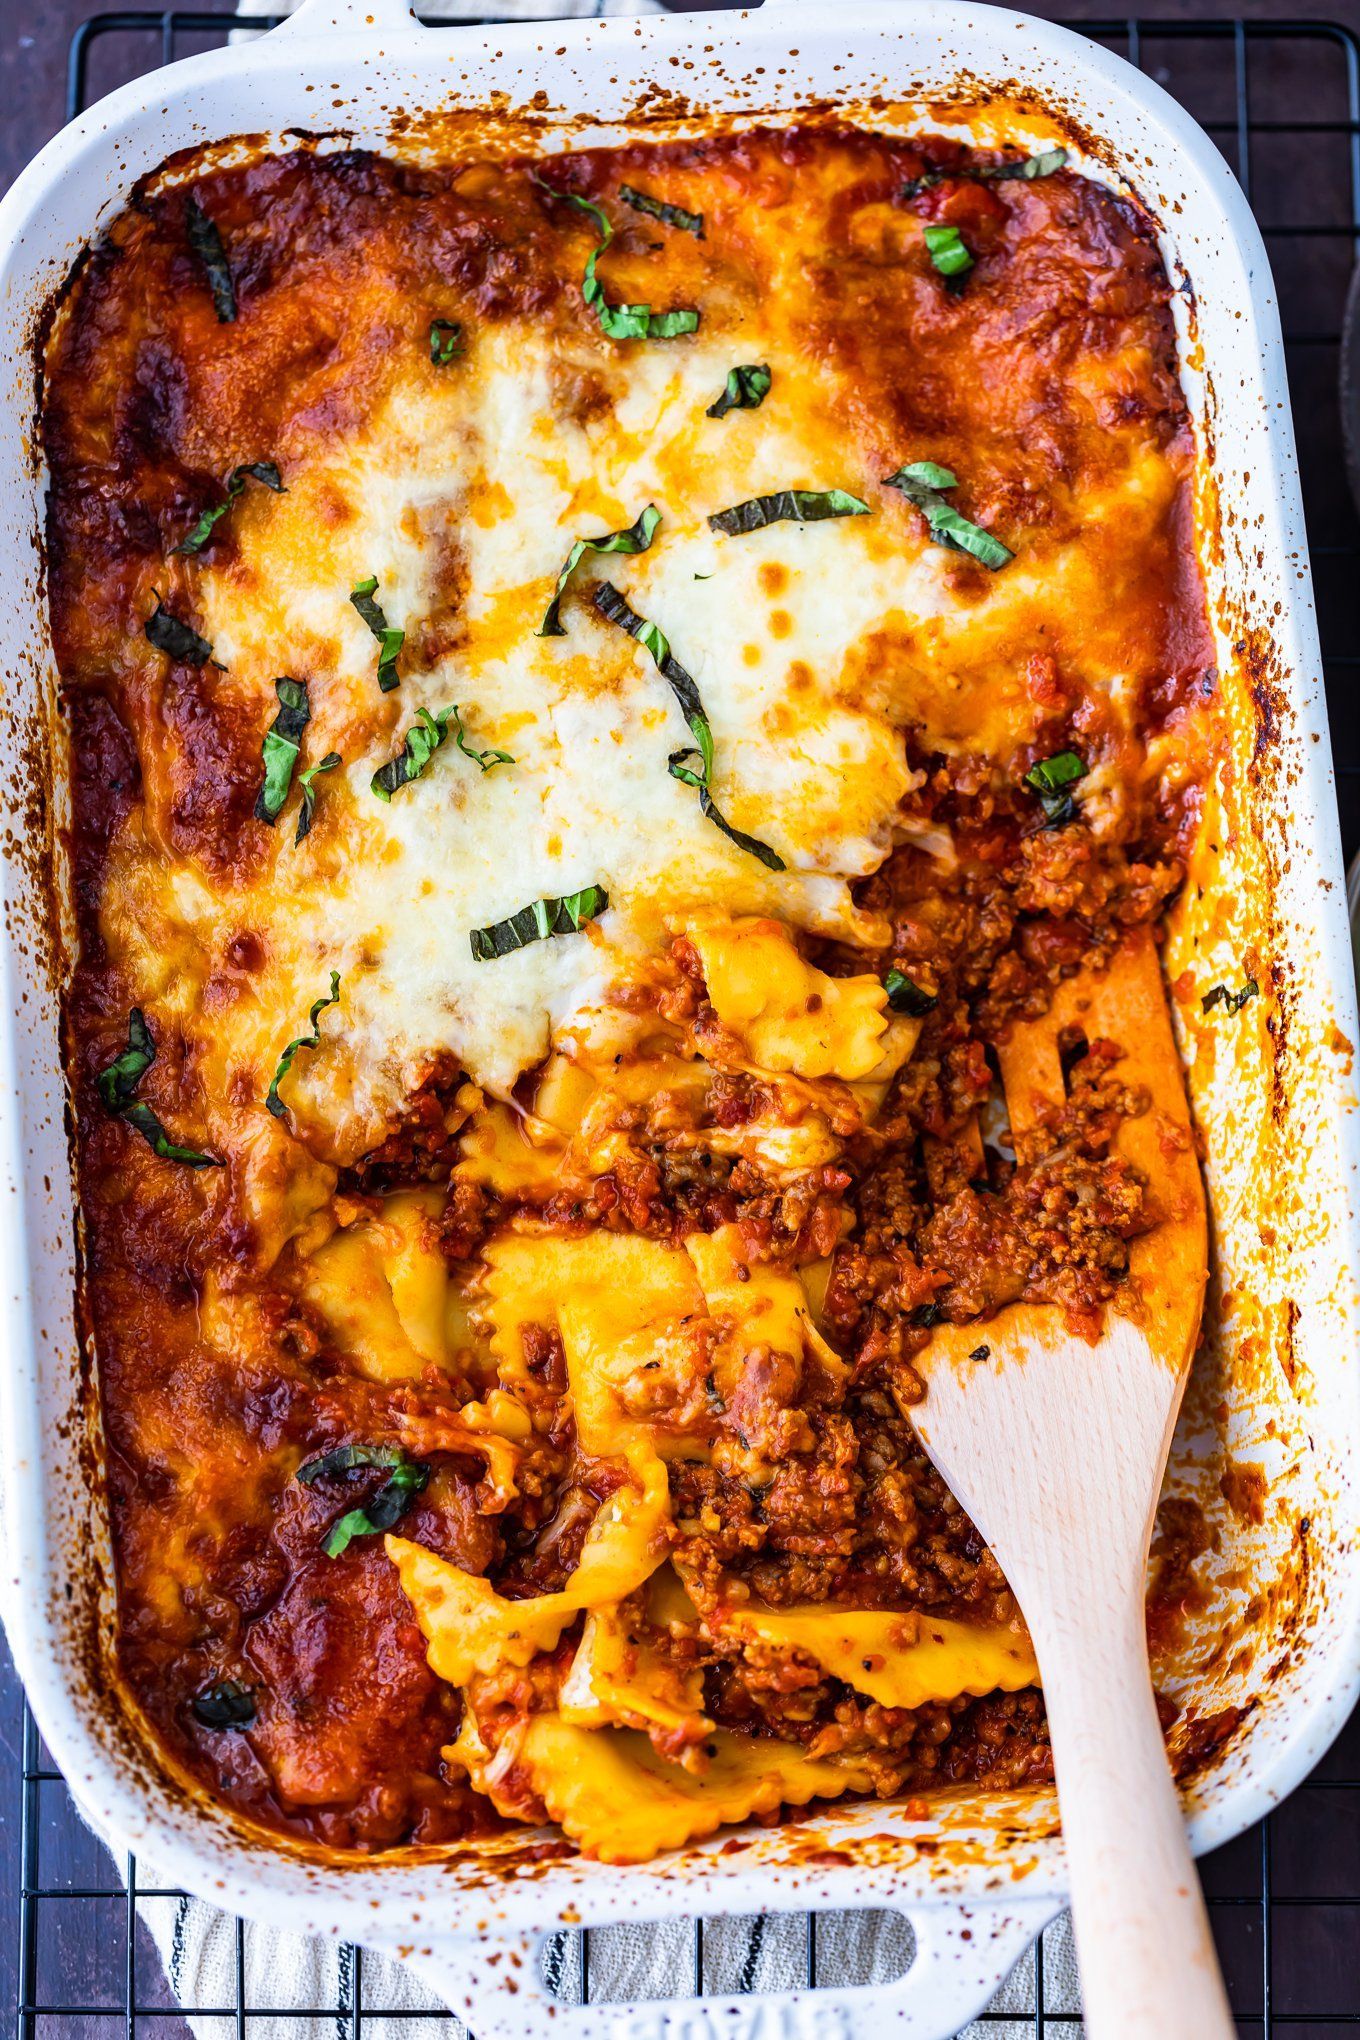 Ravioli Lasagna is a delicious mix of two favorite pasta dishes. This cheesy ravioli casserole is made with layers of ravioli, marinara sauce mixed with Italian sausage, and plenty of cheese. It's an easy lasagna recipe with an extra kick! Everyone will love this ravioli lasagna bake. -   22 lasagna recipes sausage
 ideas